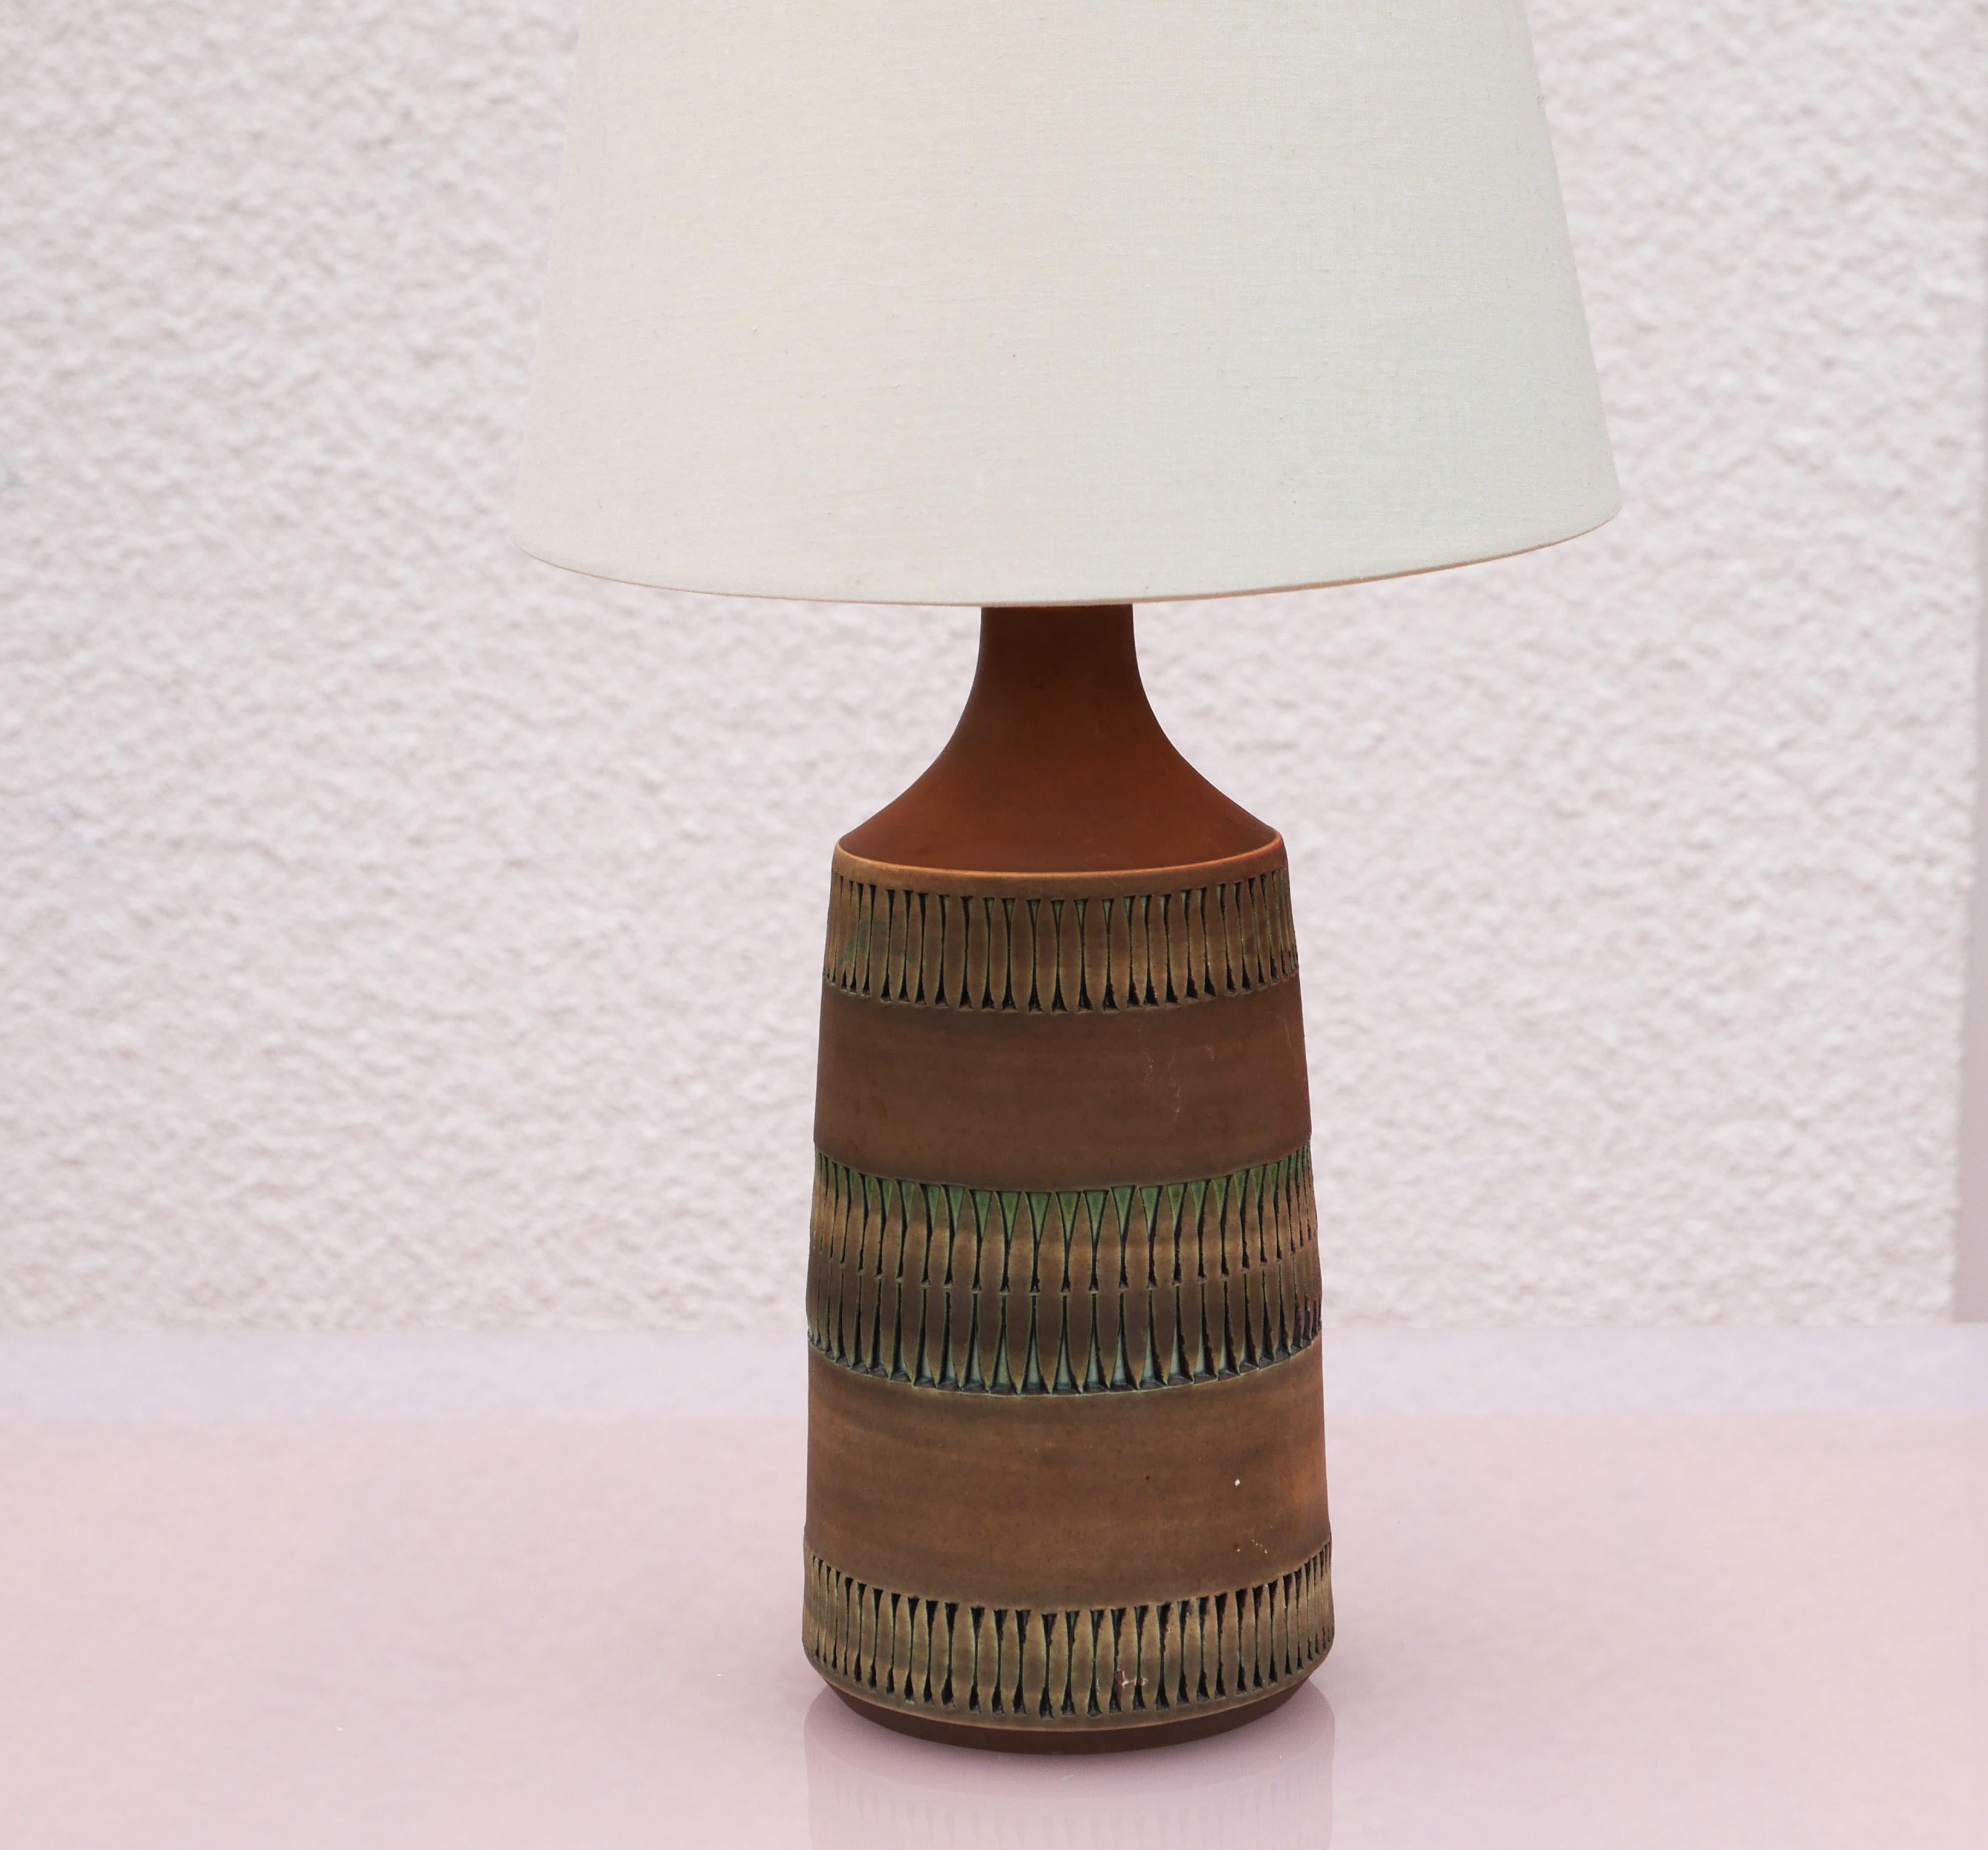 A fantastic rather large vintage ceramic lamp base, handmade from Alingsås Keramik, Sweden. This lamp base is simple in the design, with intricate patterns imbedded and it is all handmade. The patterns are simple, yet it is the colors that makes